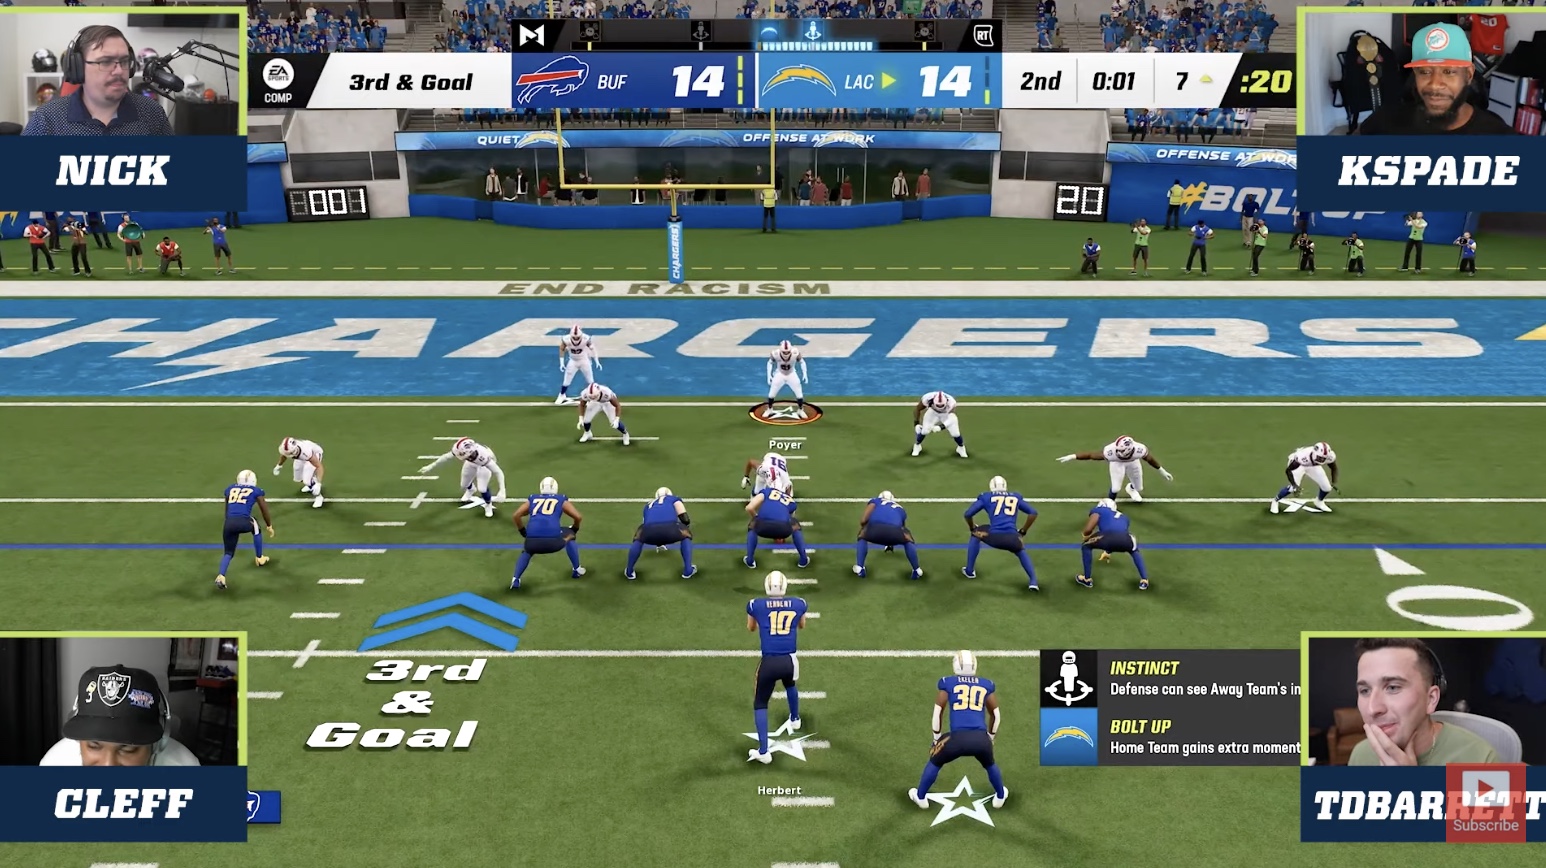 Madden NFL 23 Gameplay Video - Head-to-Head with Commentary